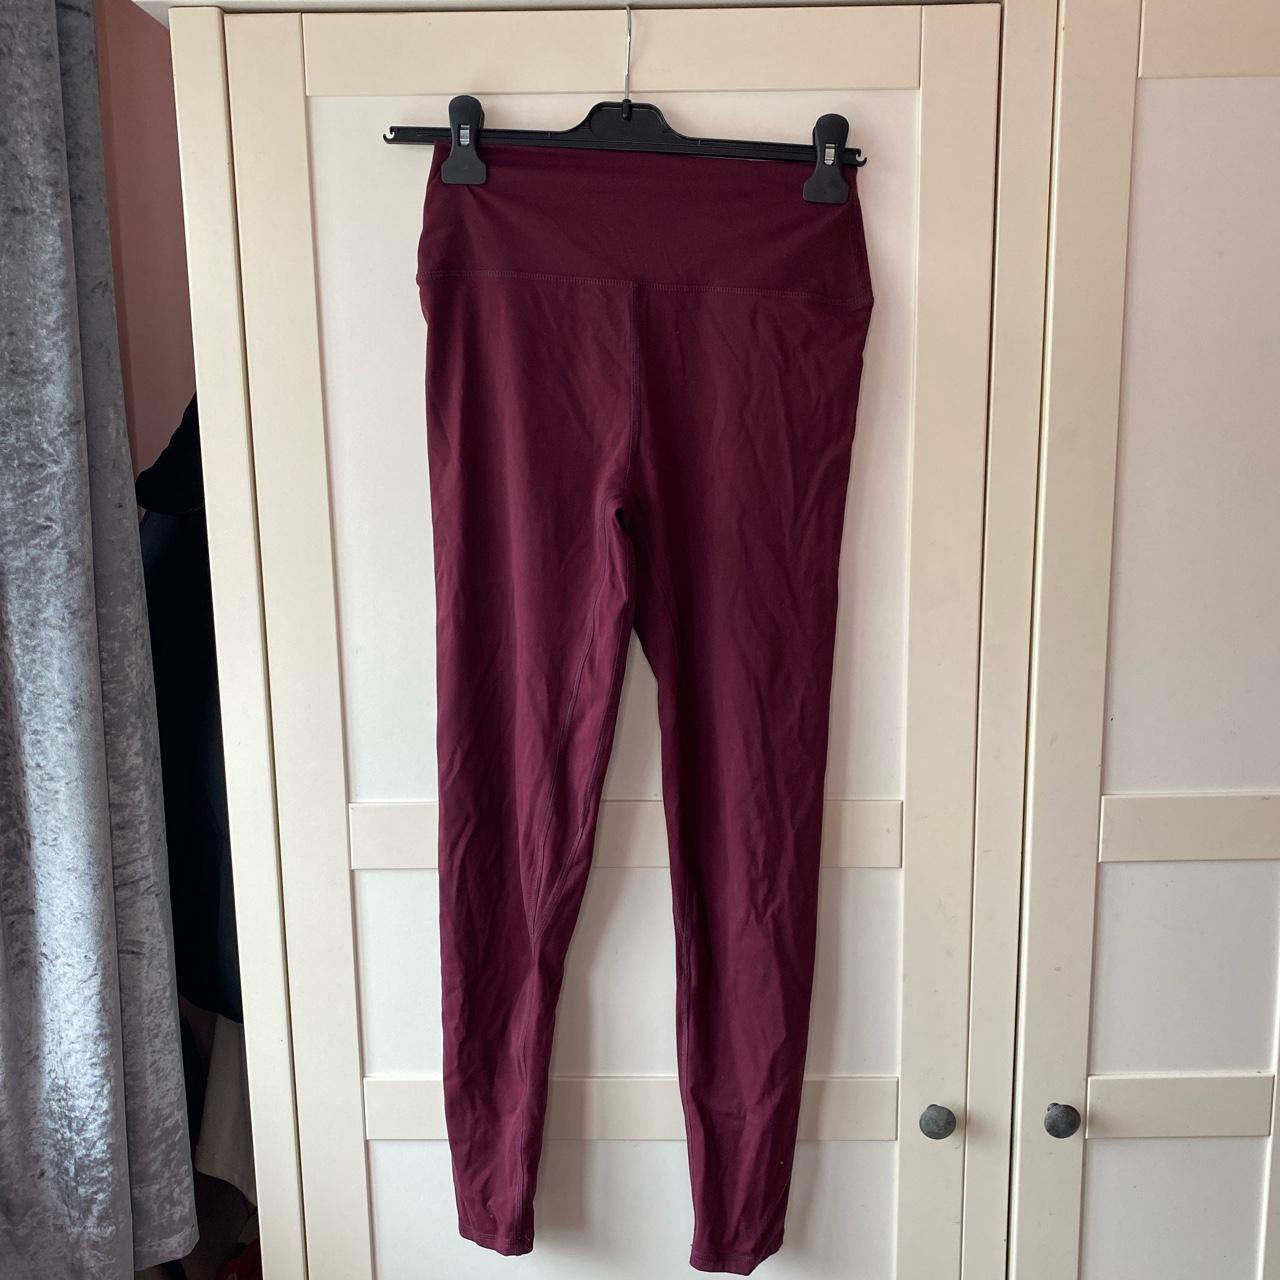 PrettyLittleThing Berry leggings and crop top gym... - Depop